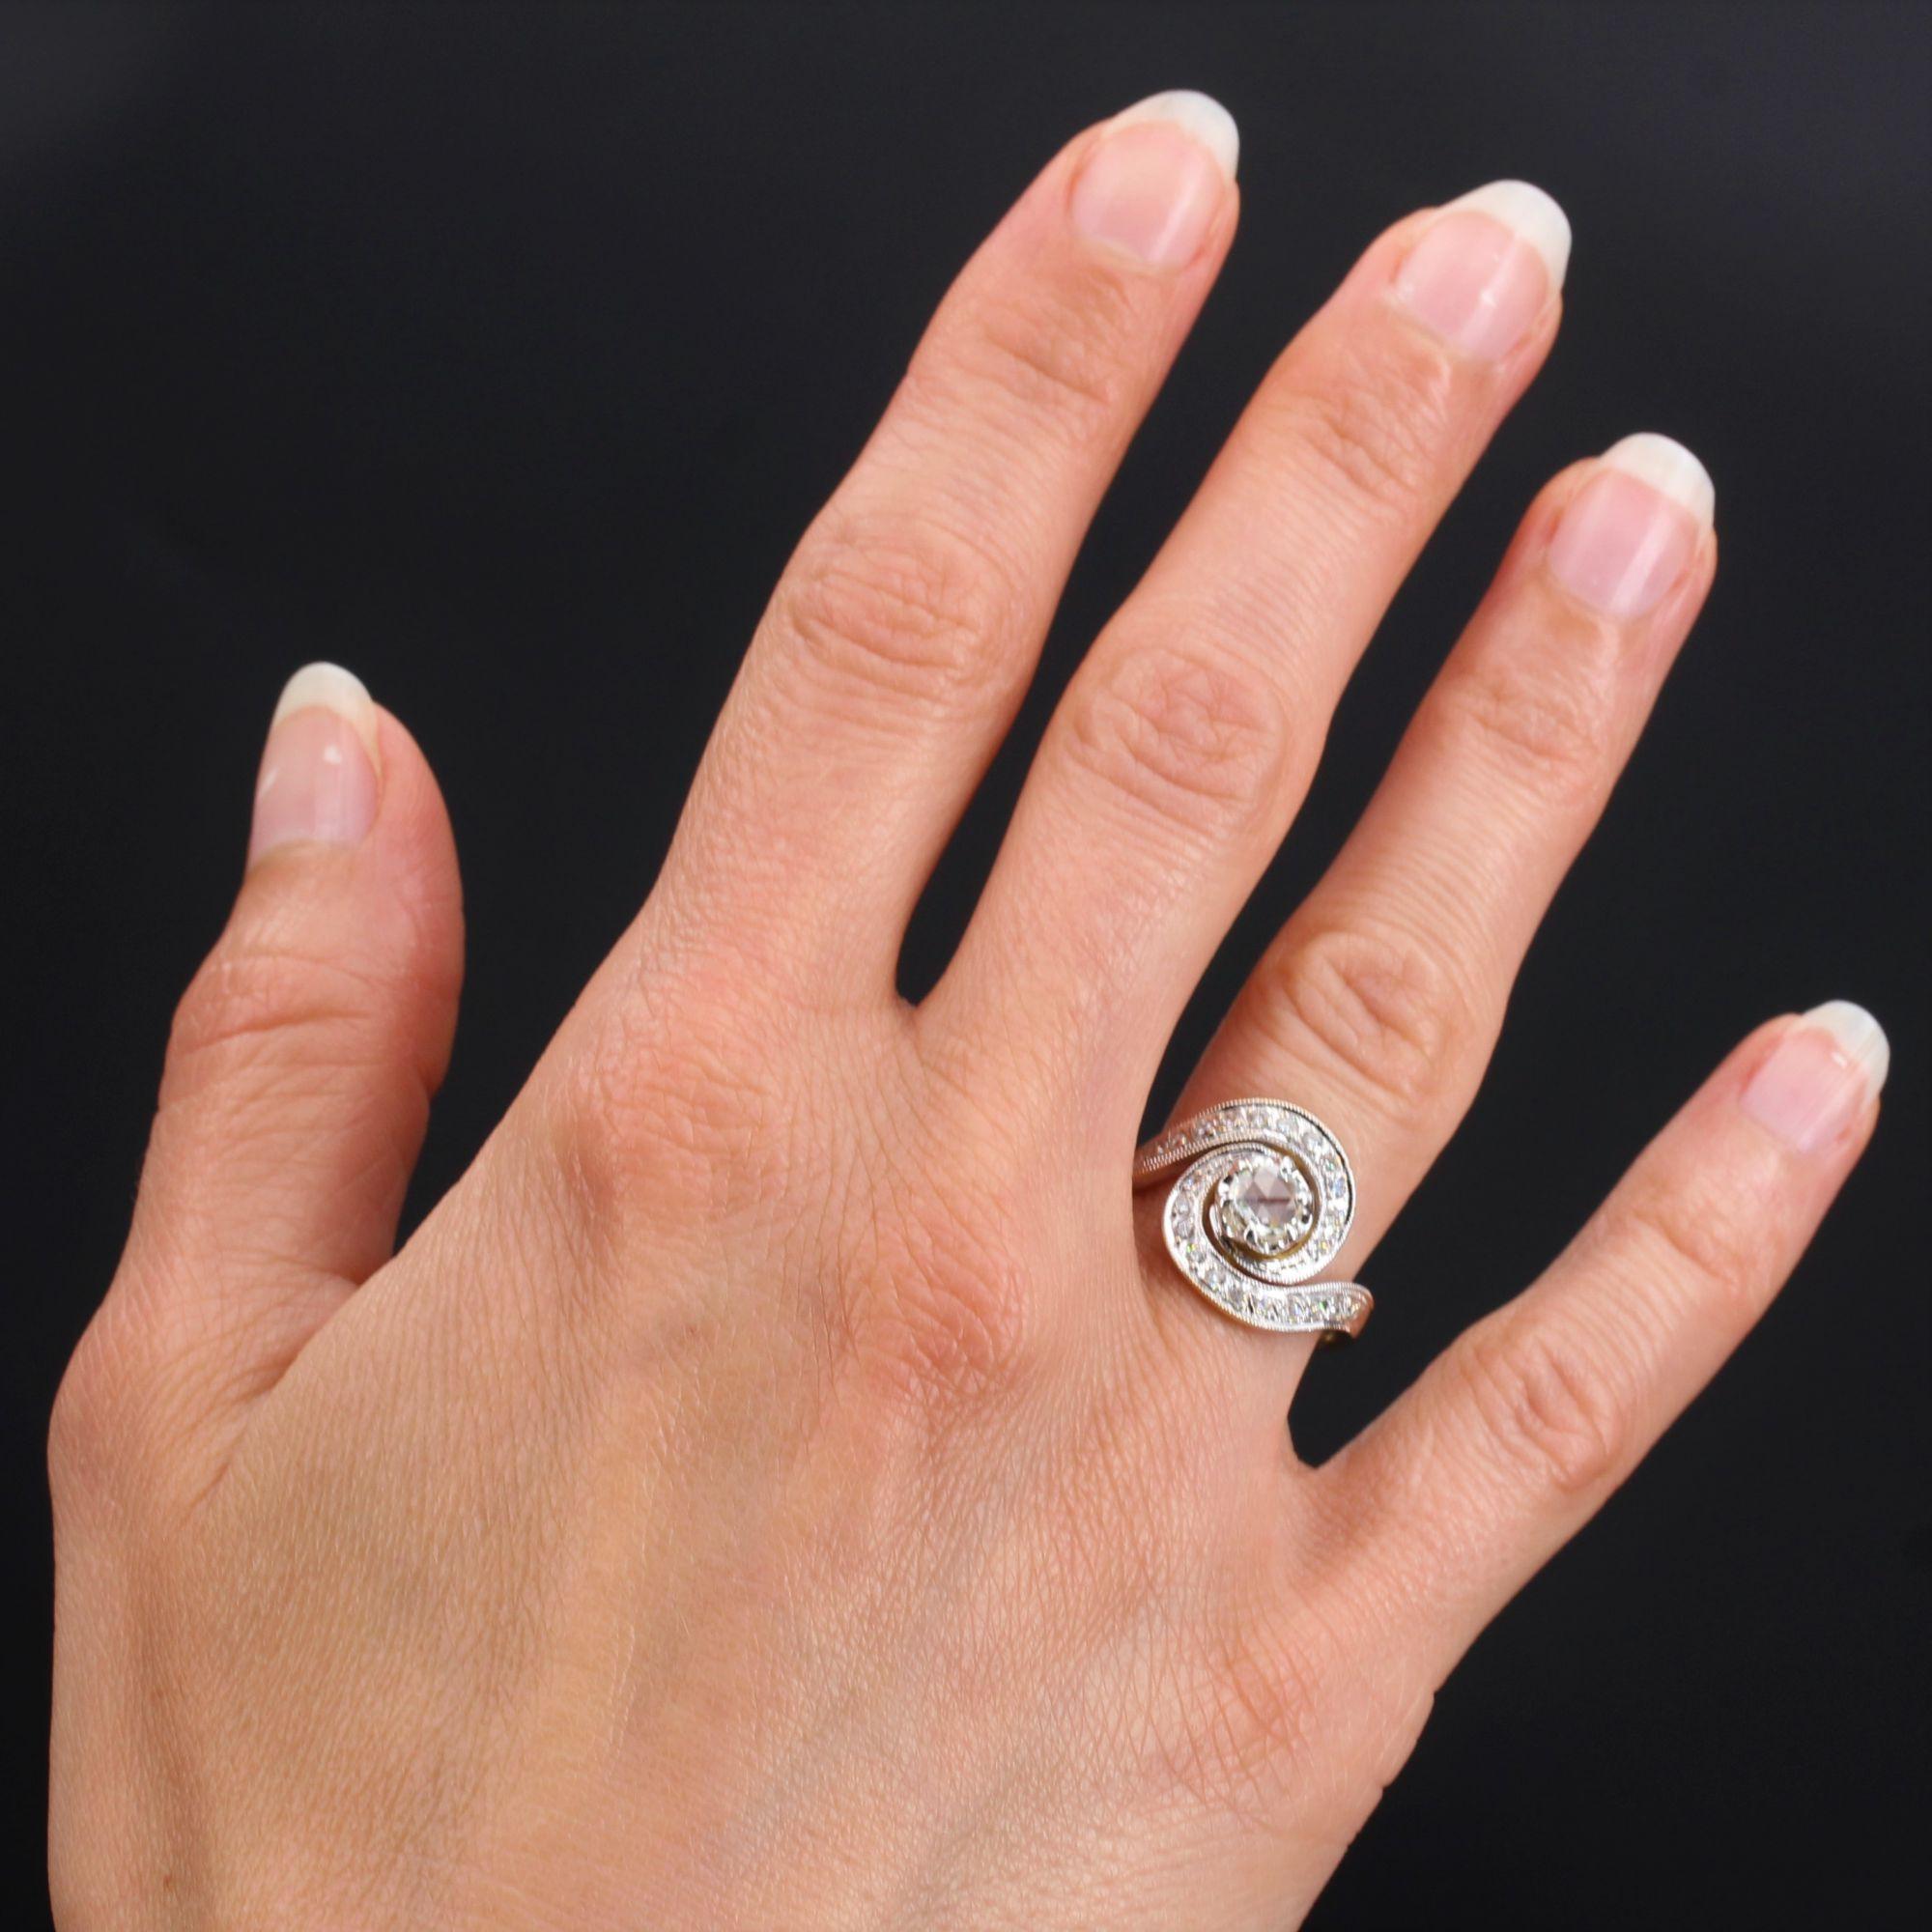 Ring in 18 karat yellow and white gold, eagle head hallmark.
Called a swirl ring, this 2-tone gold ring is set on top with a rose-cut diamond, claw-set. The whole swirl is set with brilliant- cut diamonds.
Weight of the central diamond : 0.26 carat